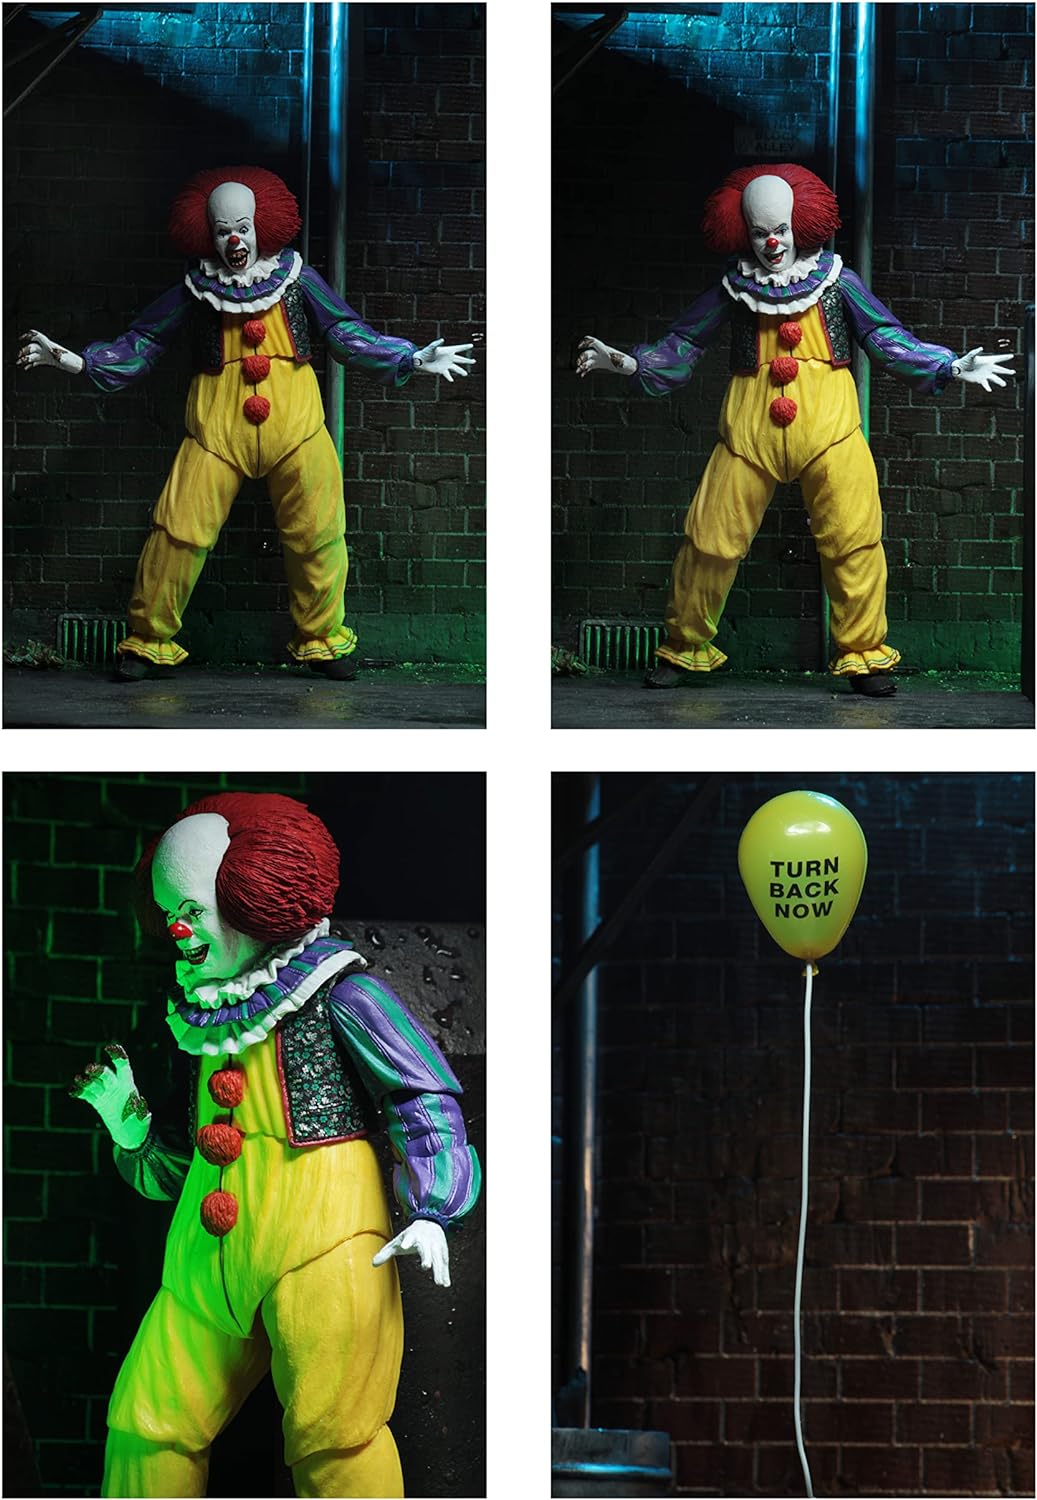 NECA It 1990: Ultimate Pennywise 7"" Action Figure